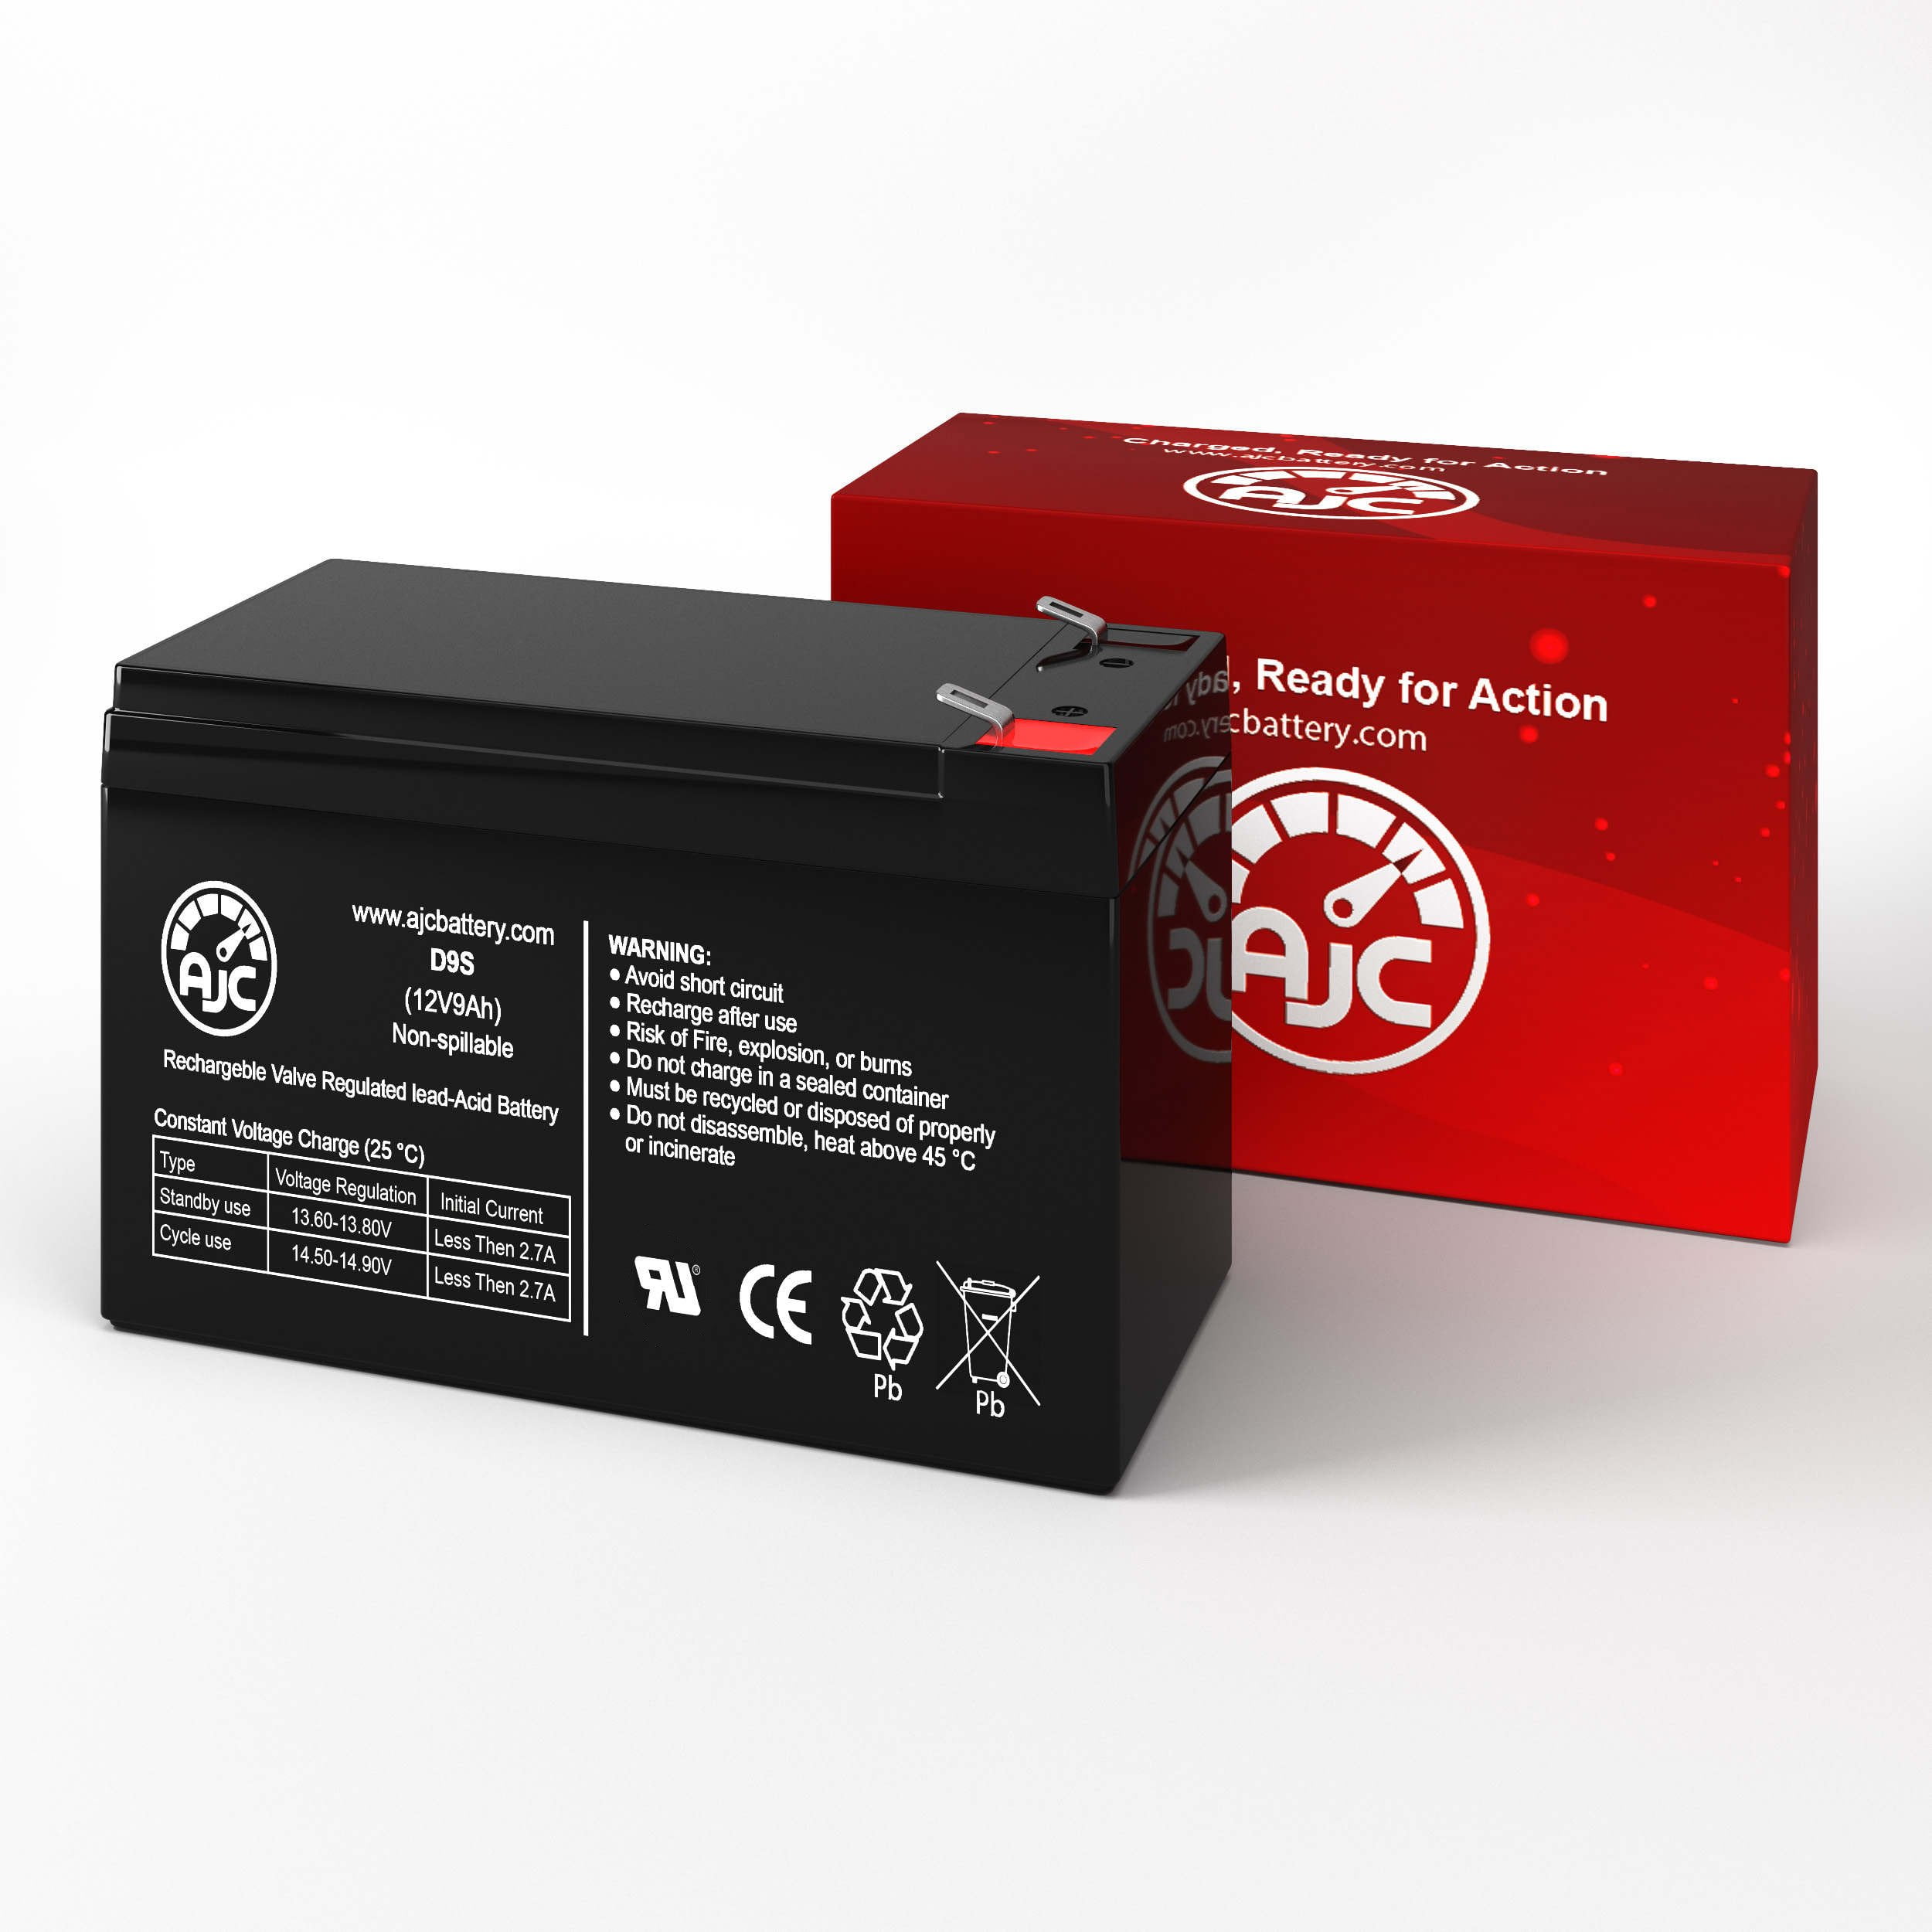 para Systems-Minuteman EnSpire EN900 12V 9Ah UPS Battery This is an AJC Brand Replacement 